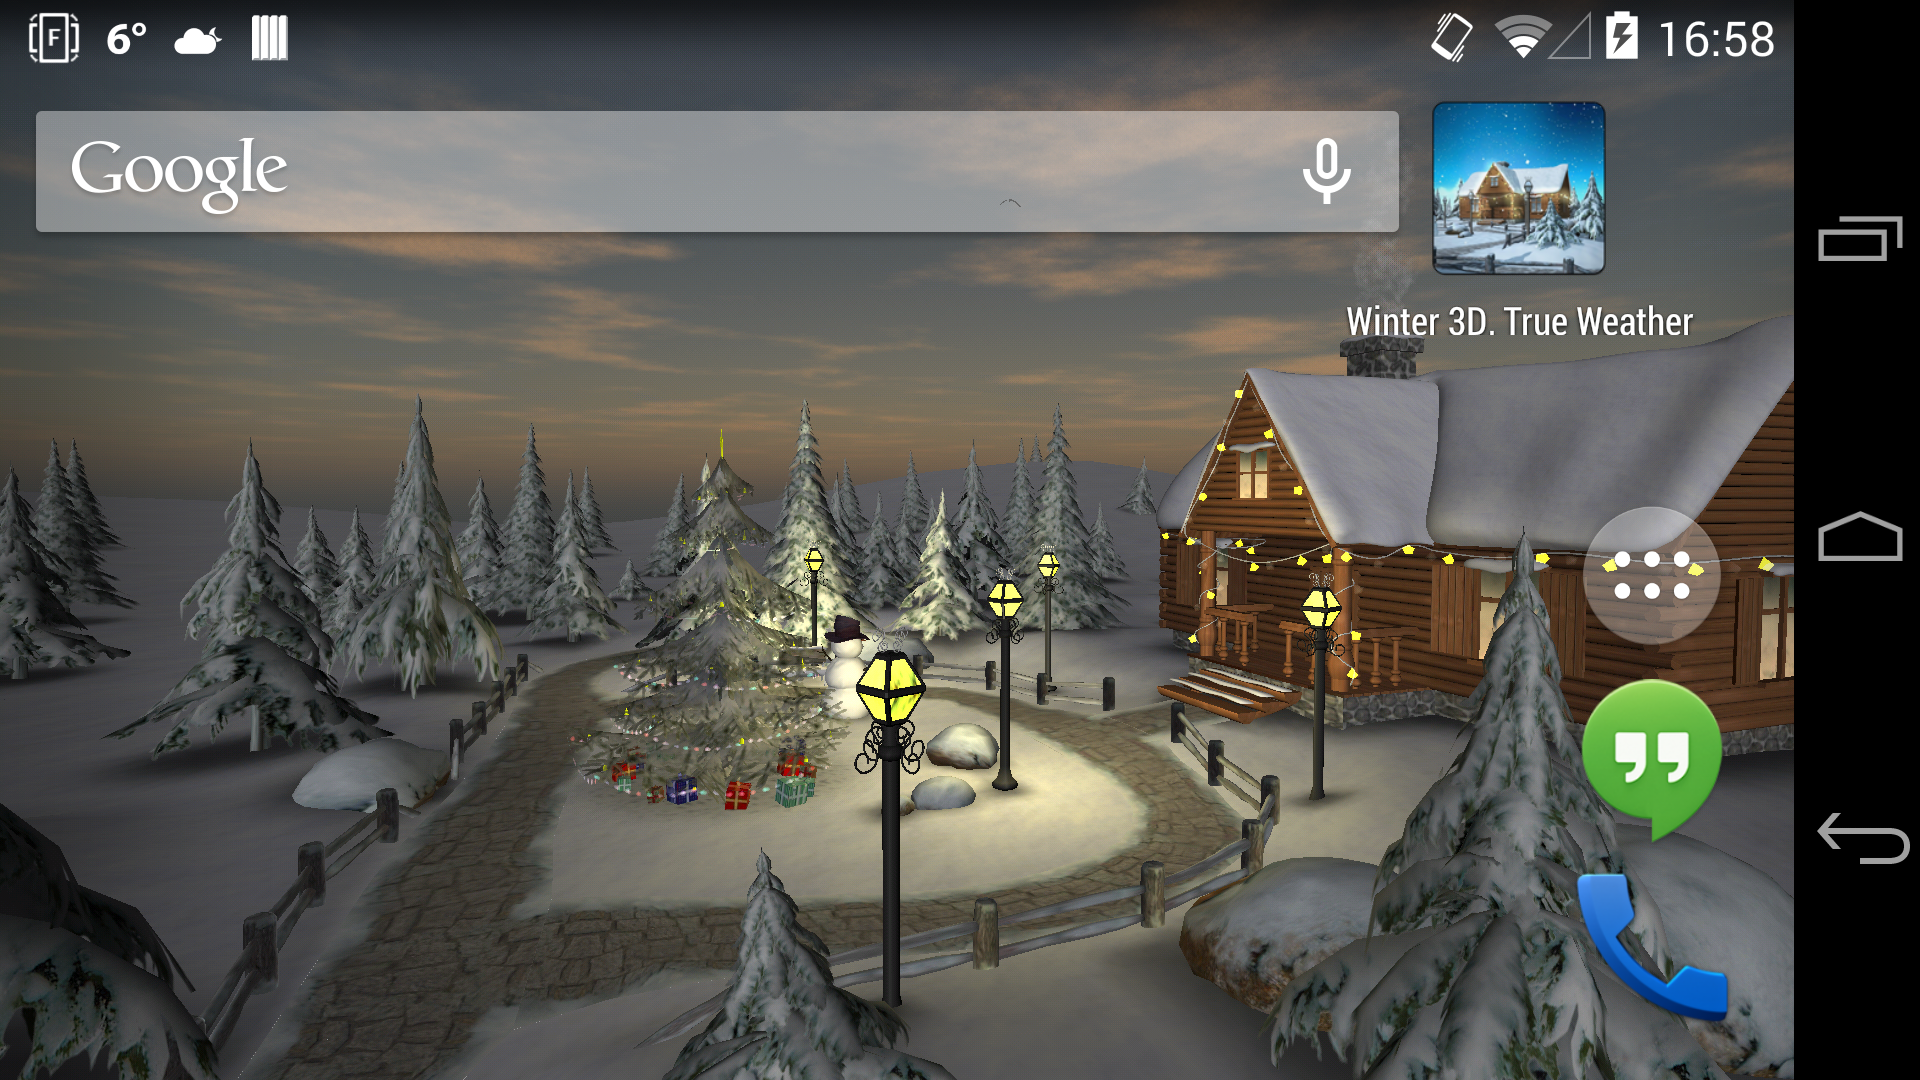 Android application Winter 3D, True Weather screenshort